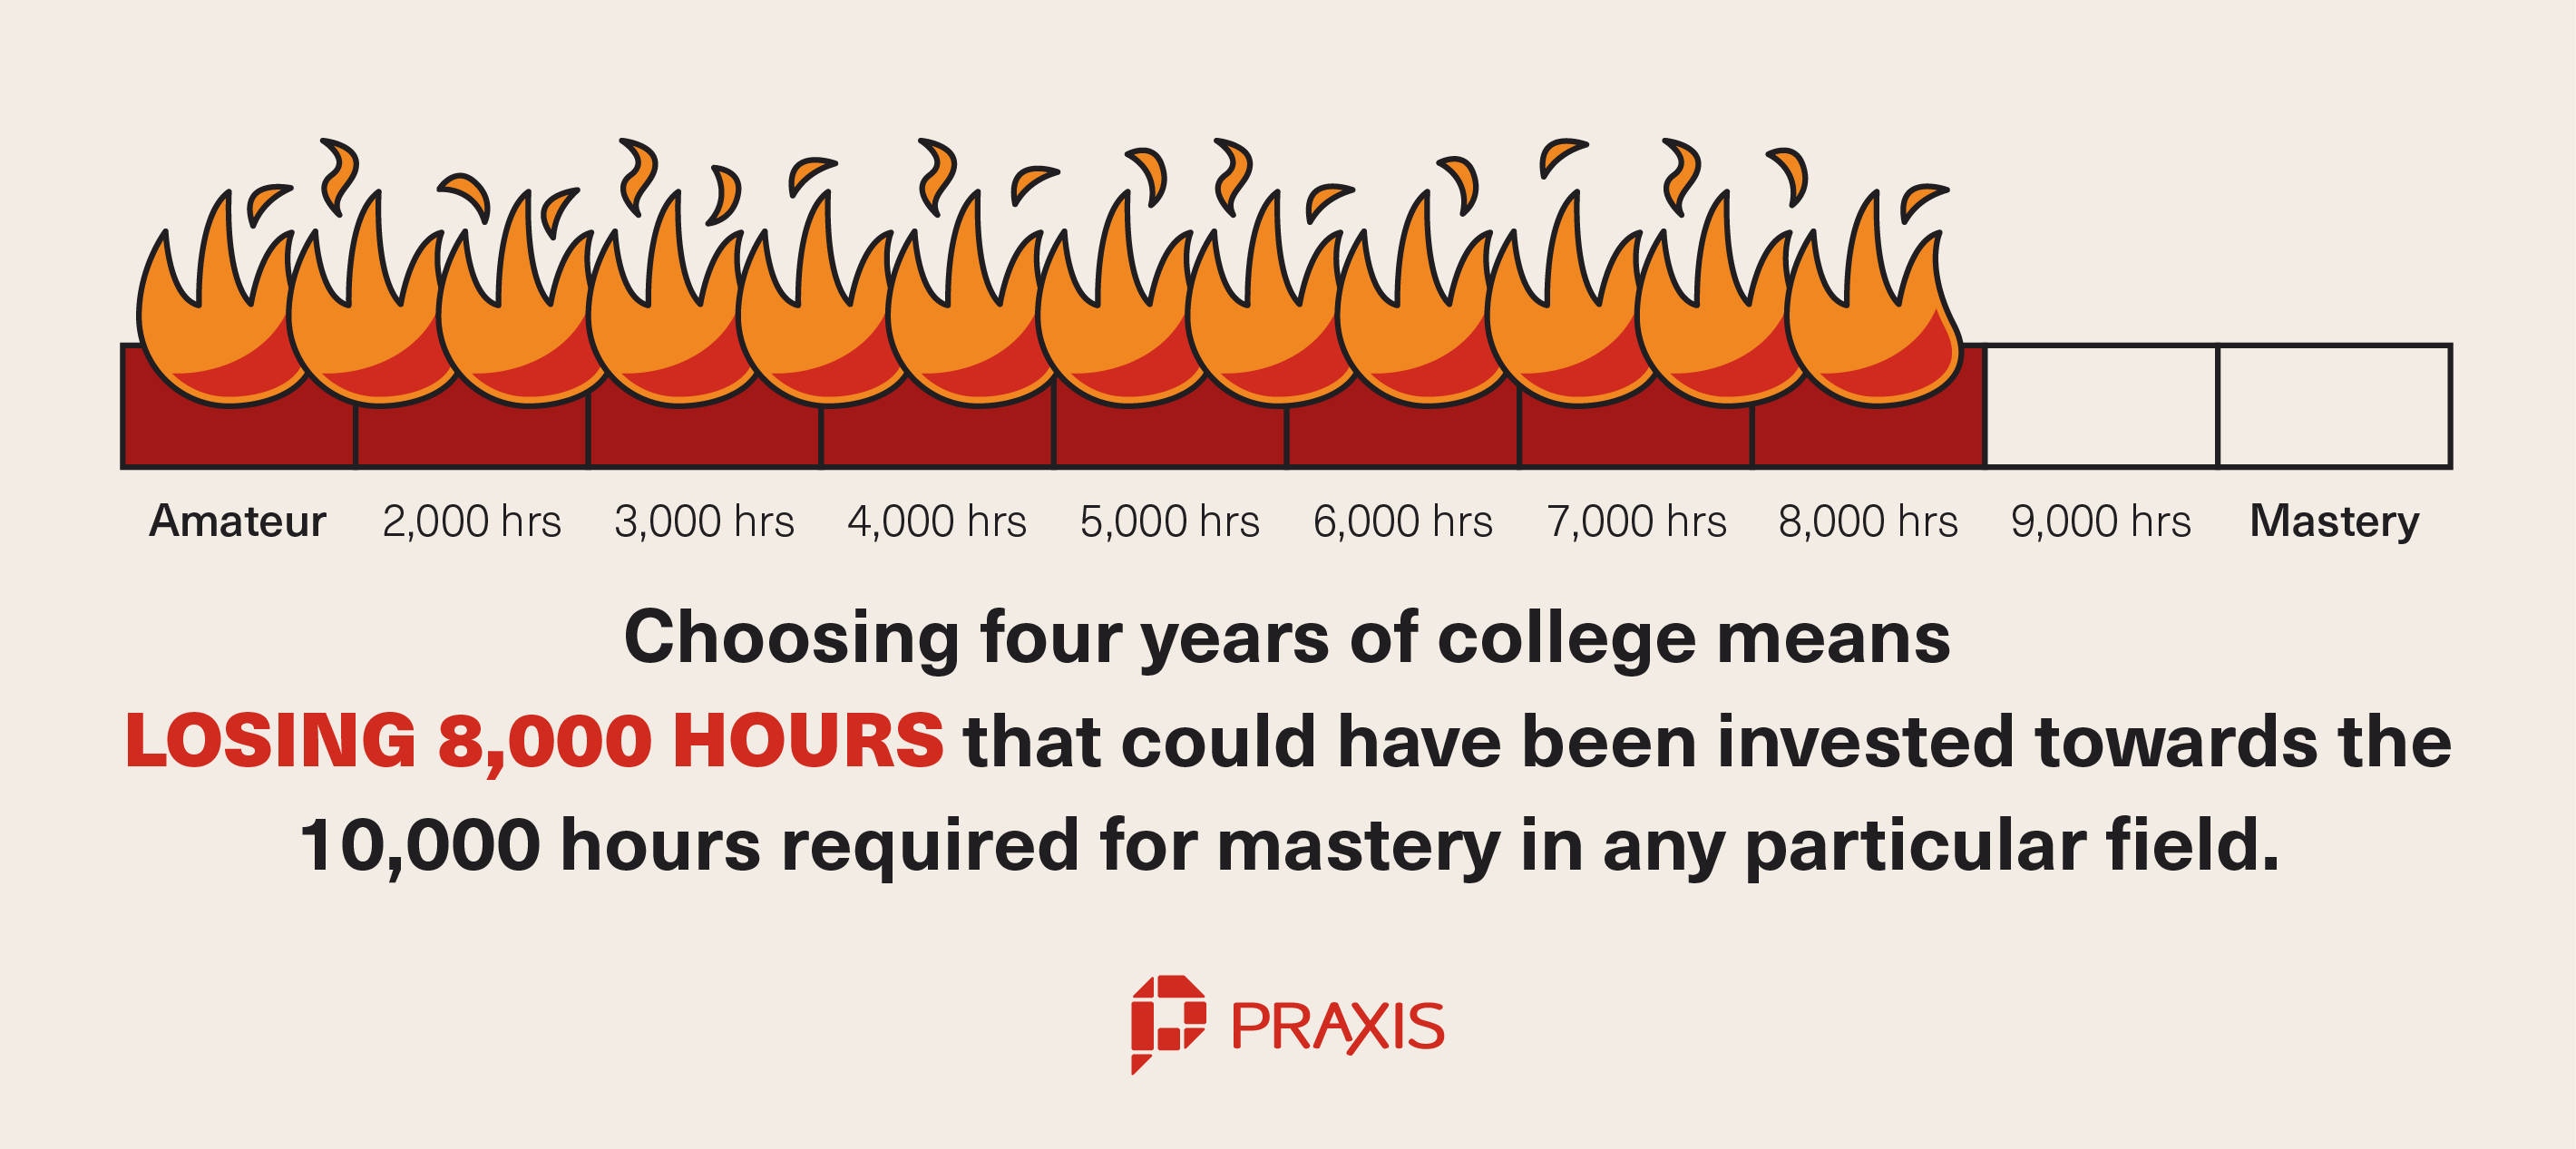 College Carries a Huge Time and Opportunity Cost